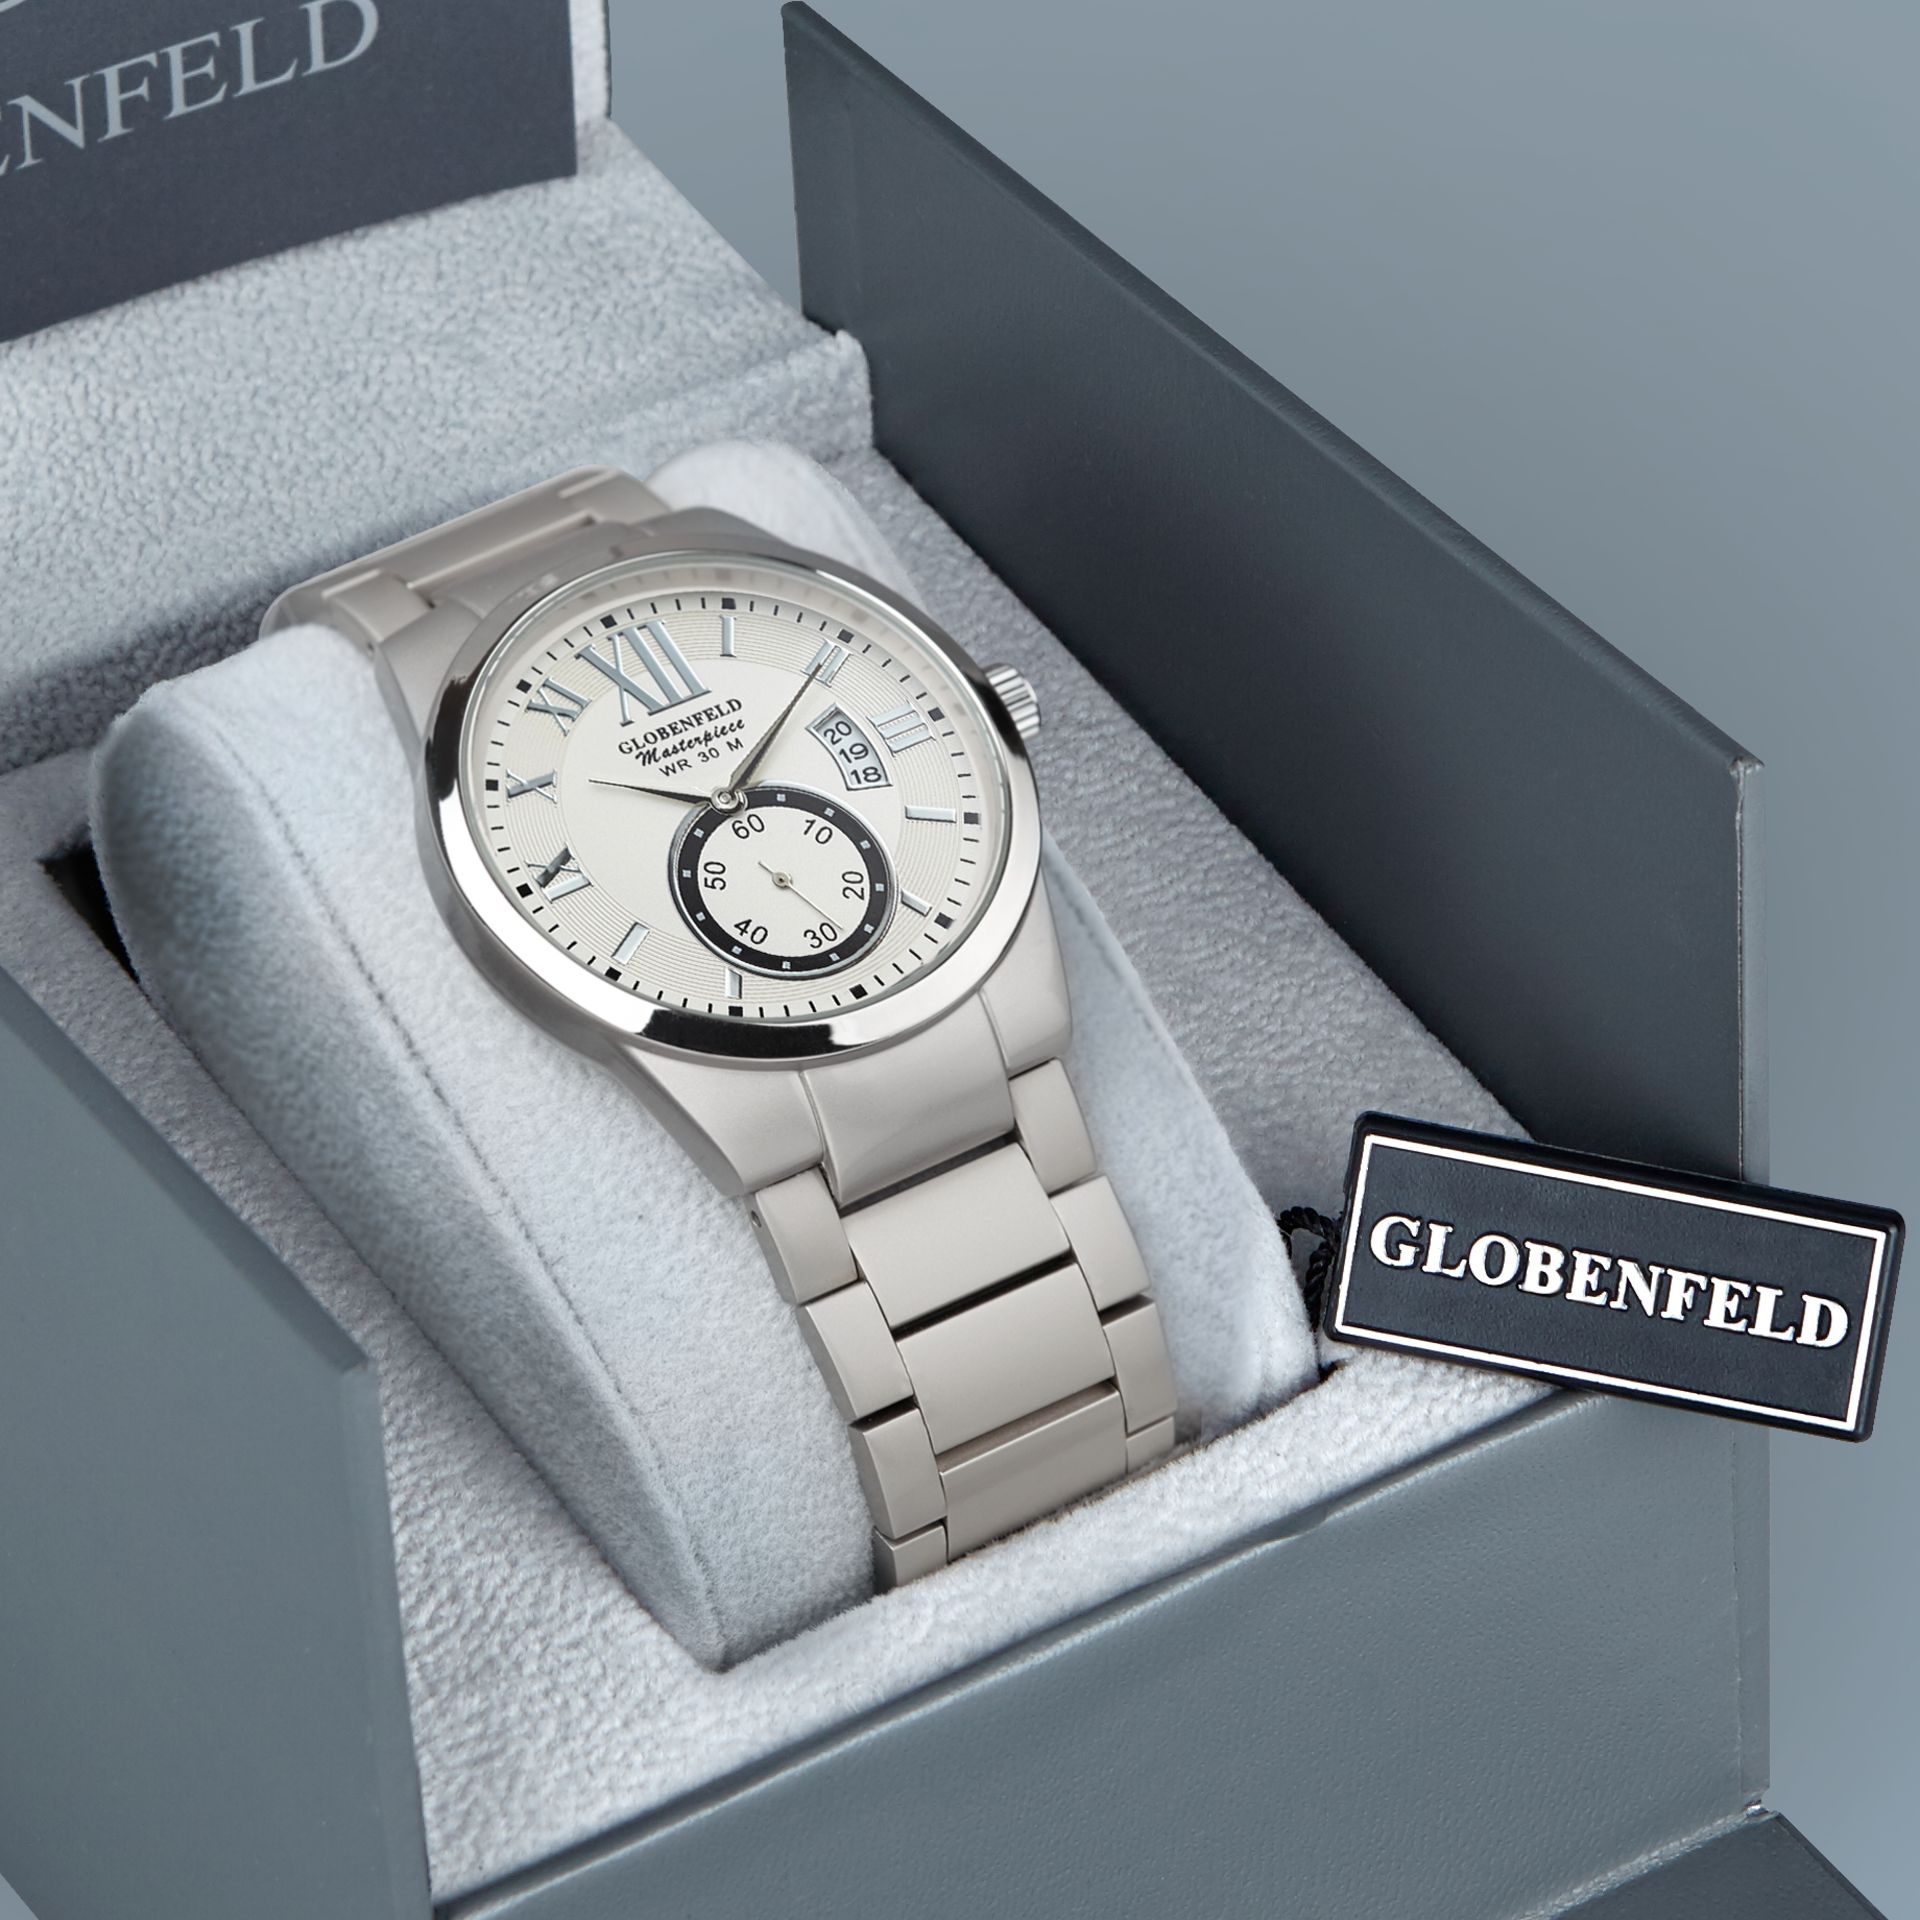 V *TRADE QTY* Brand New Gents Globenfeld White Masterpiece Watch With Box & Papers SRP Up to £440.00